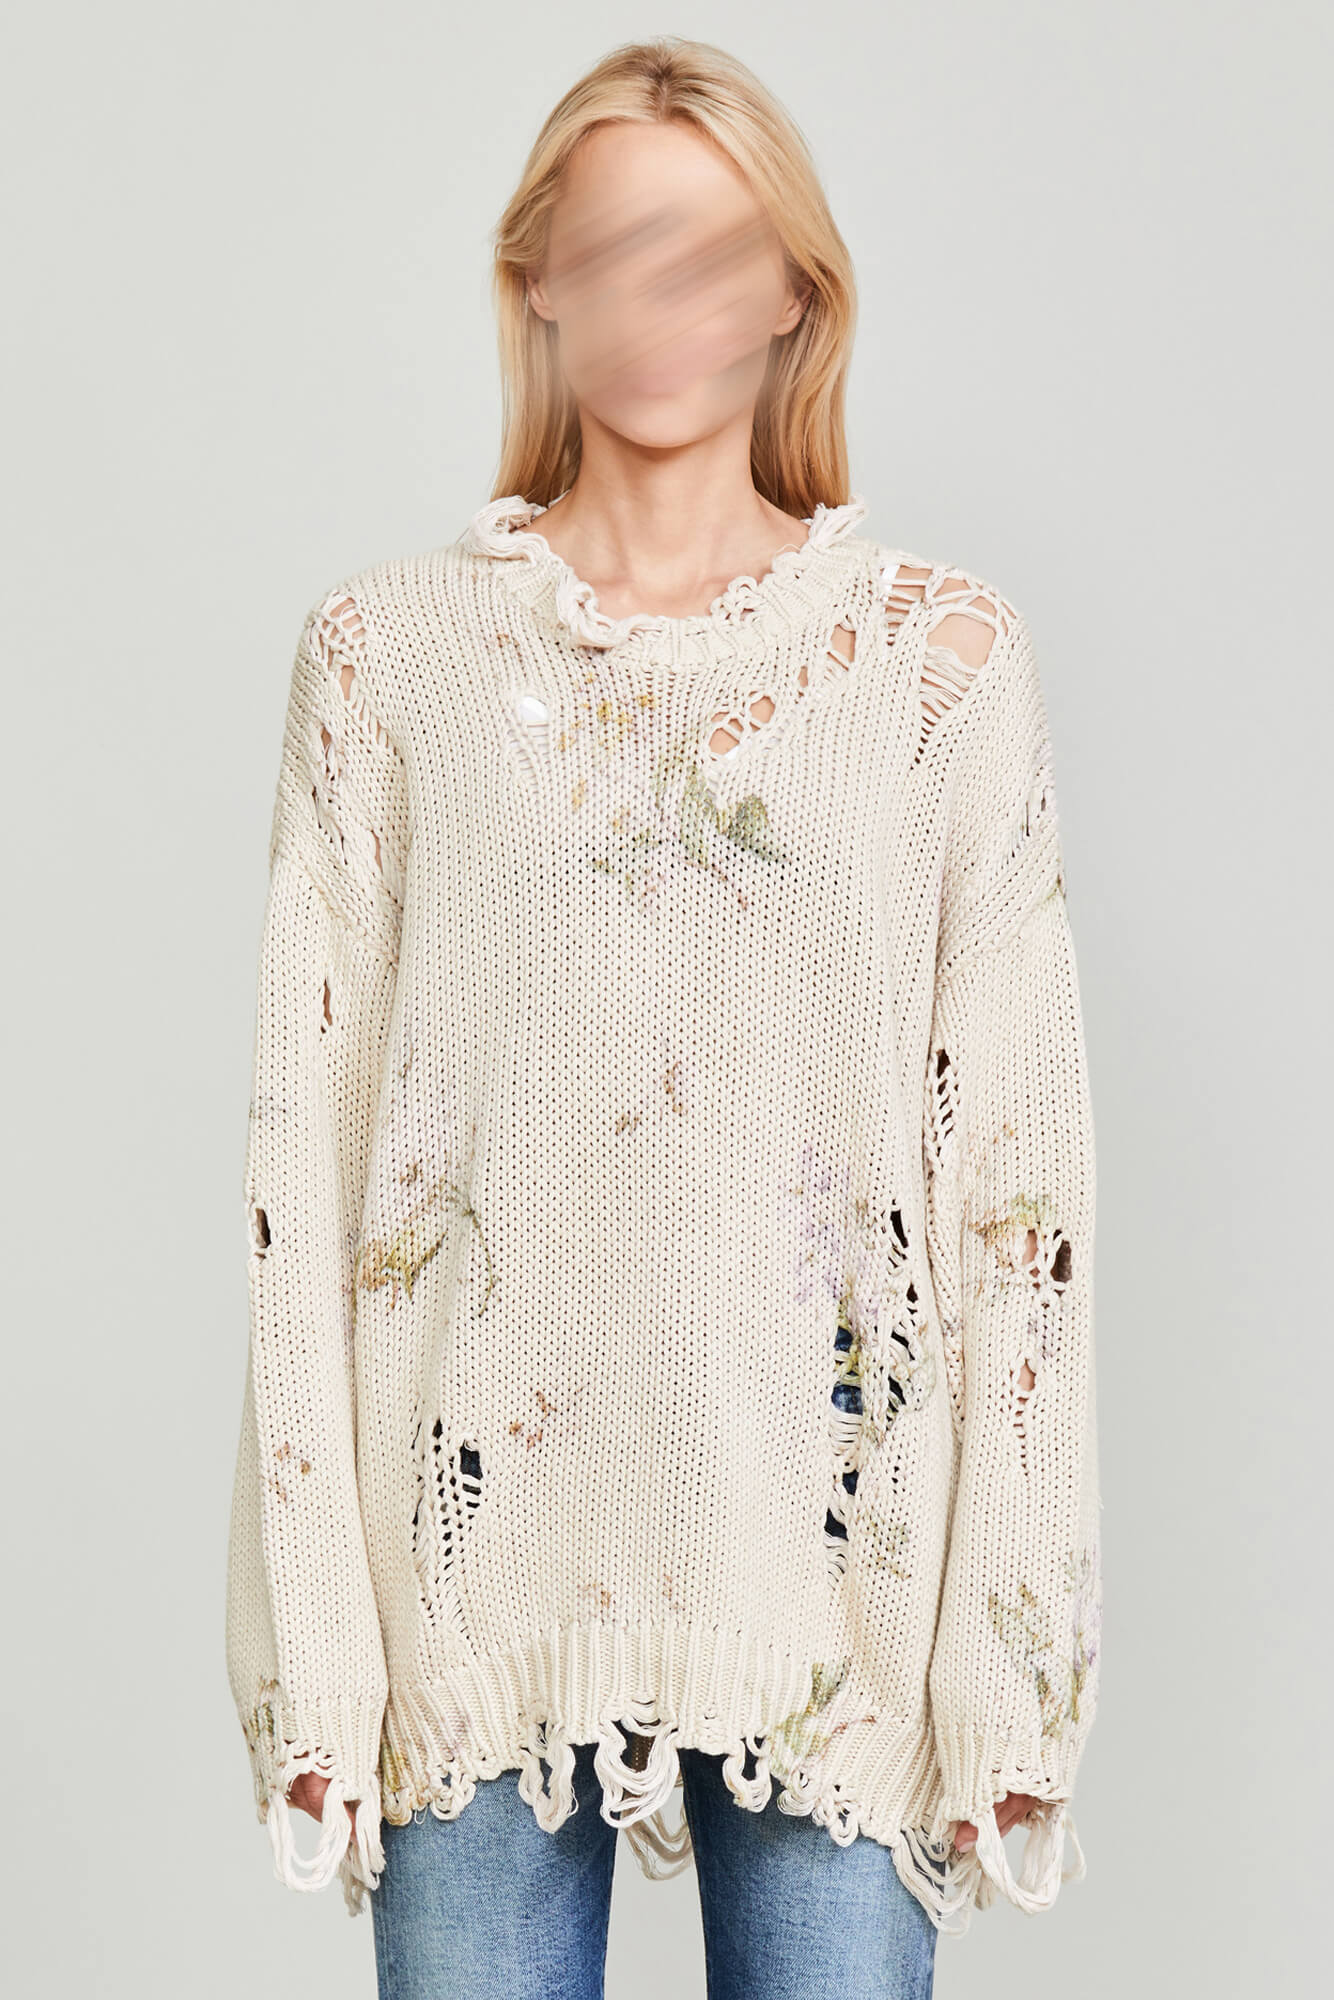 DISTRESSED OVERSIZED SWEATER - FLORAL ON KHAKI – R13